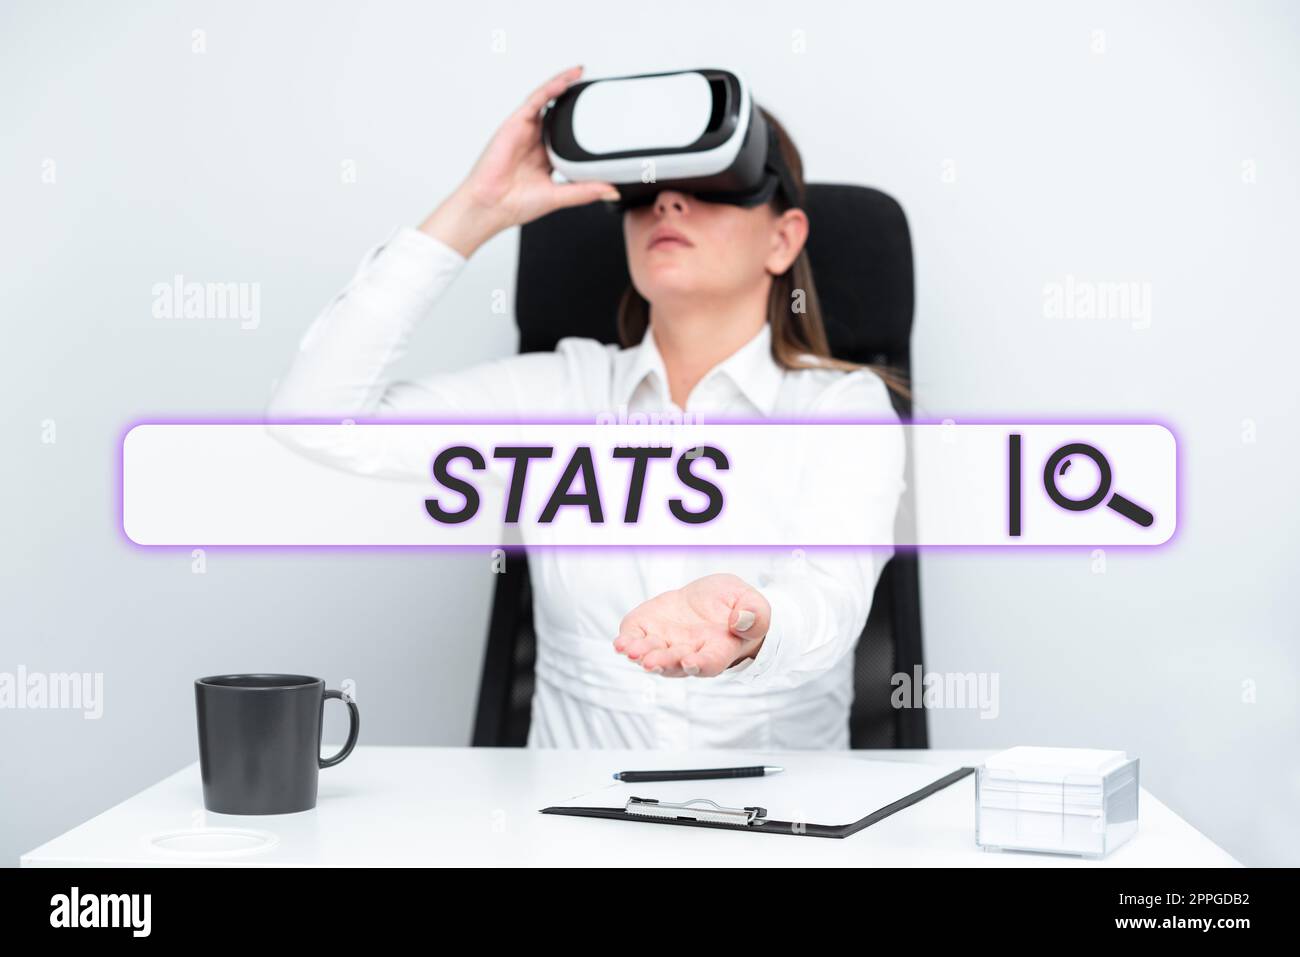 Sign displaying Stats. Business overview practice or science of collecting and analysing numerical data Stock Photo